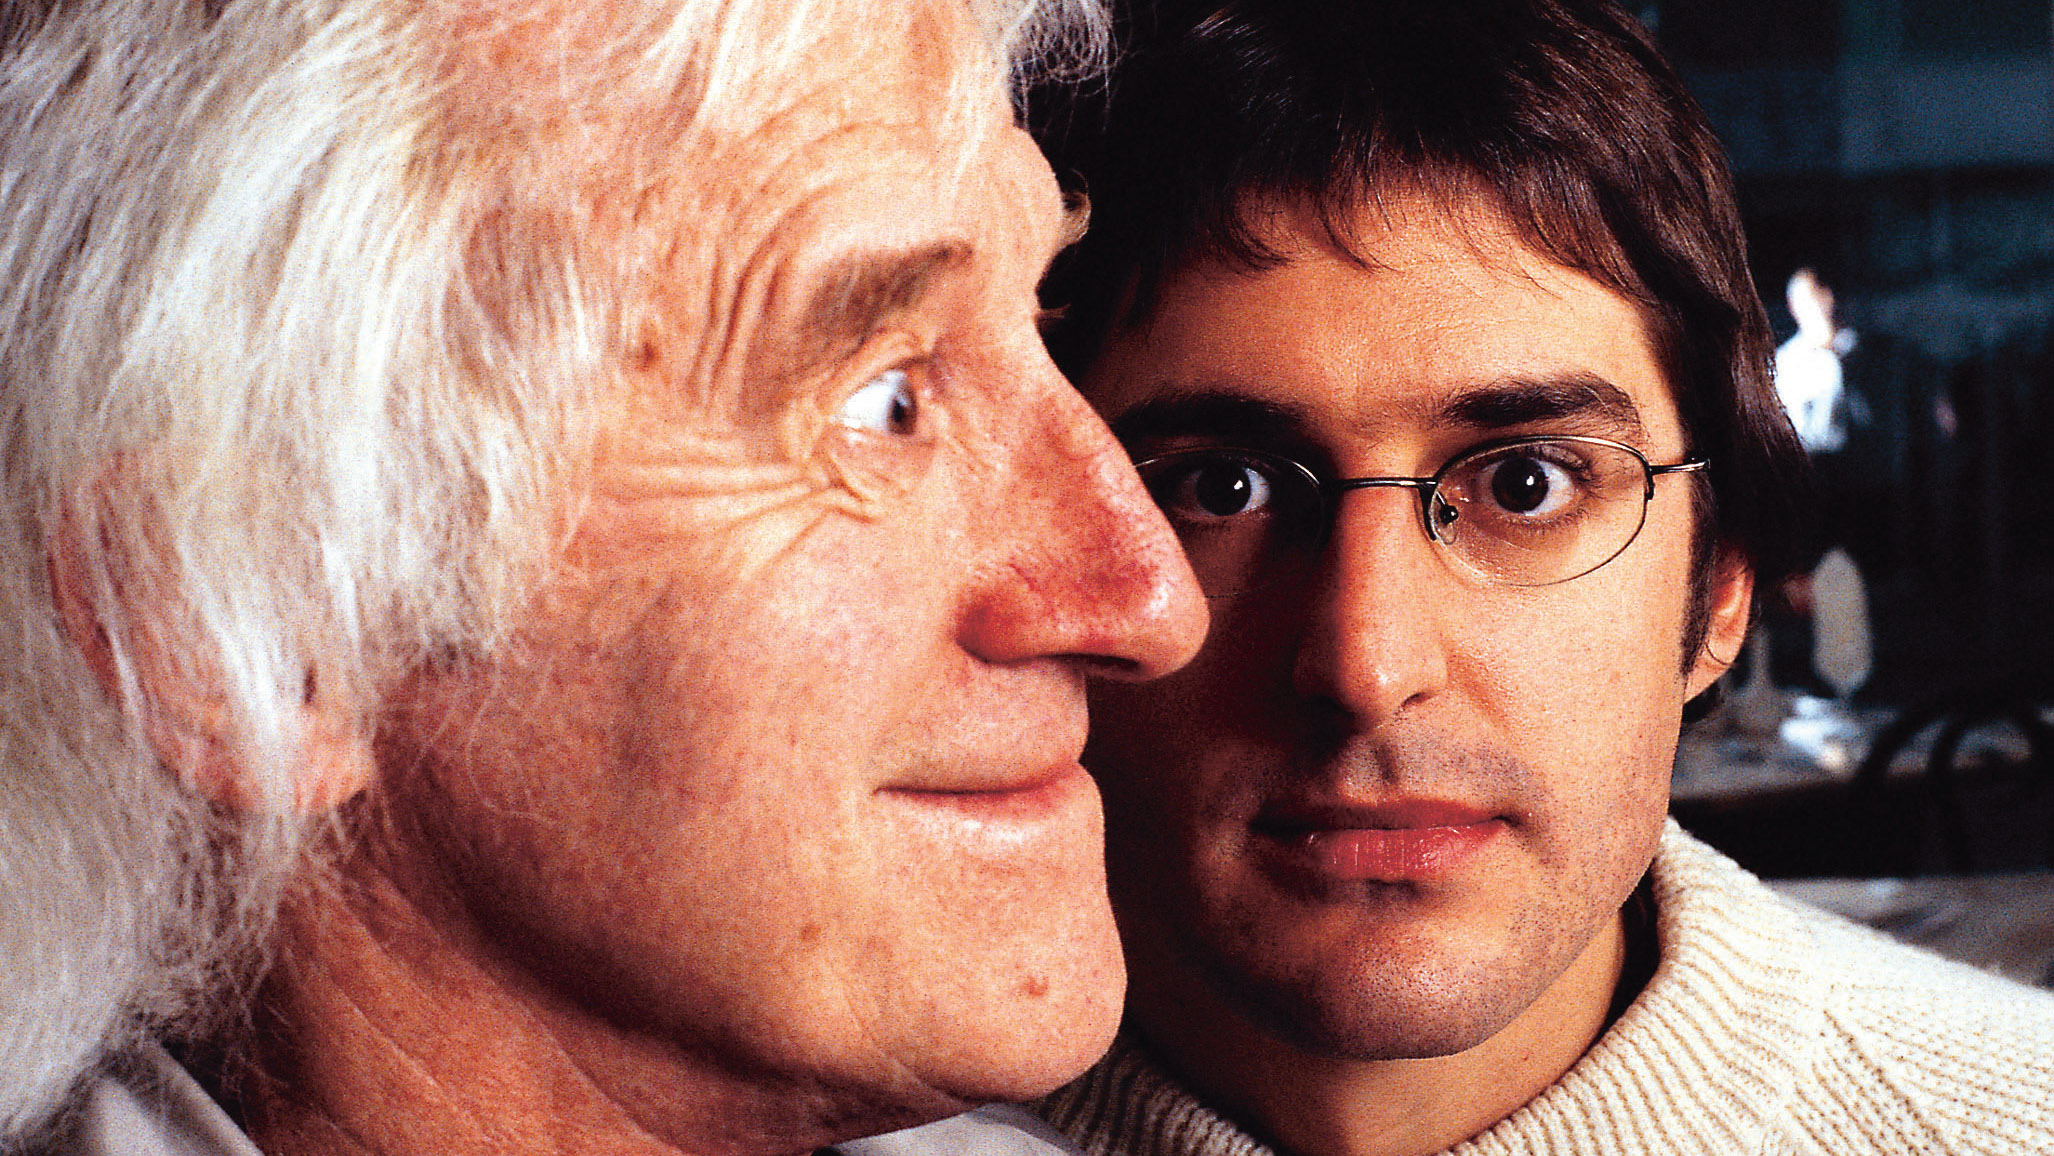 Louis Theroux and Jimmy Savile in 'when Louis Met Jimmy'.